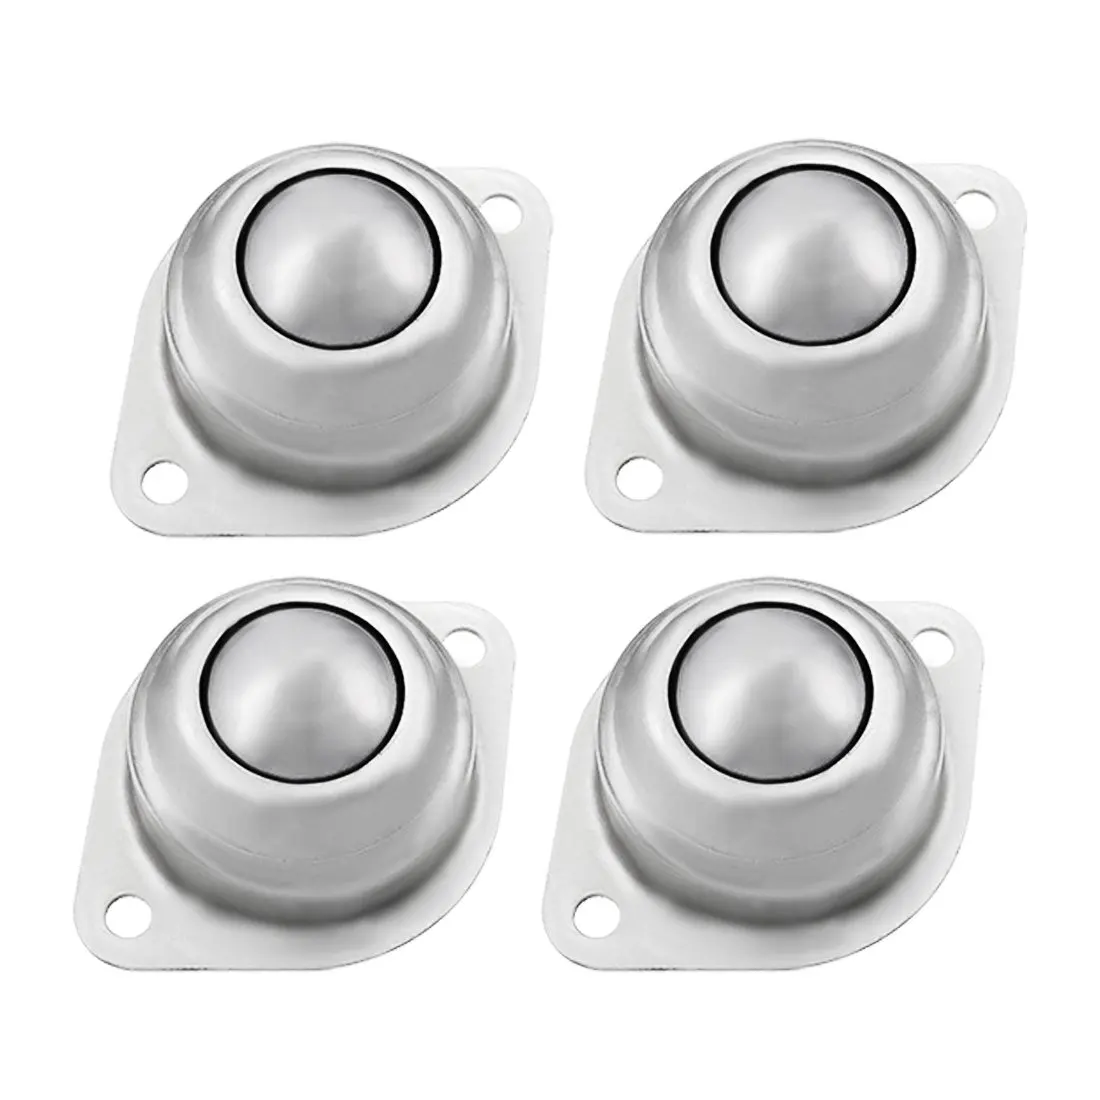 Cheap 1 Inch Ball Bearing, find 1 Inch Ball Bearing deals on line at ...